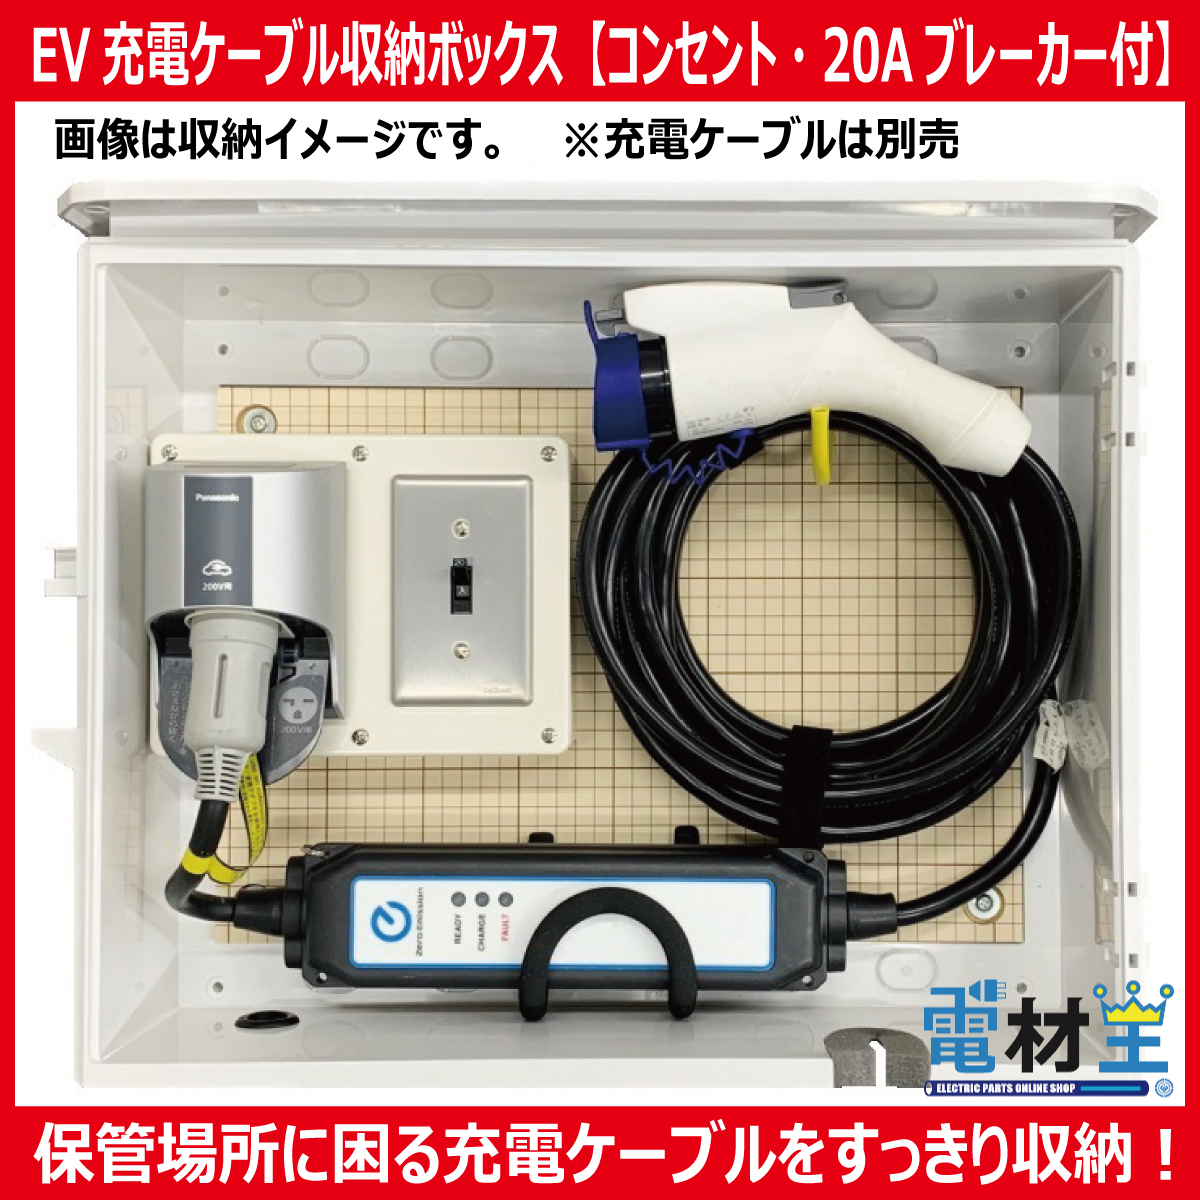 EV PHEV用 充電ケーブル収納ボックス コンセント ブレーカー付 D-EVBOX54A-BC 電気自動車画像